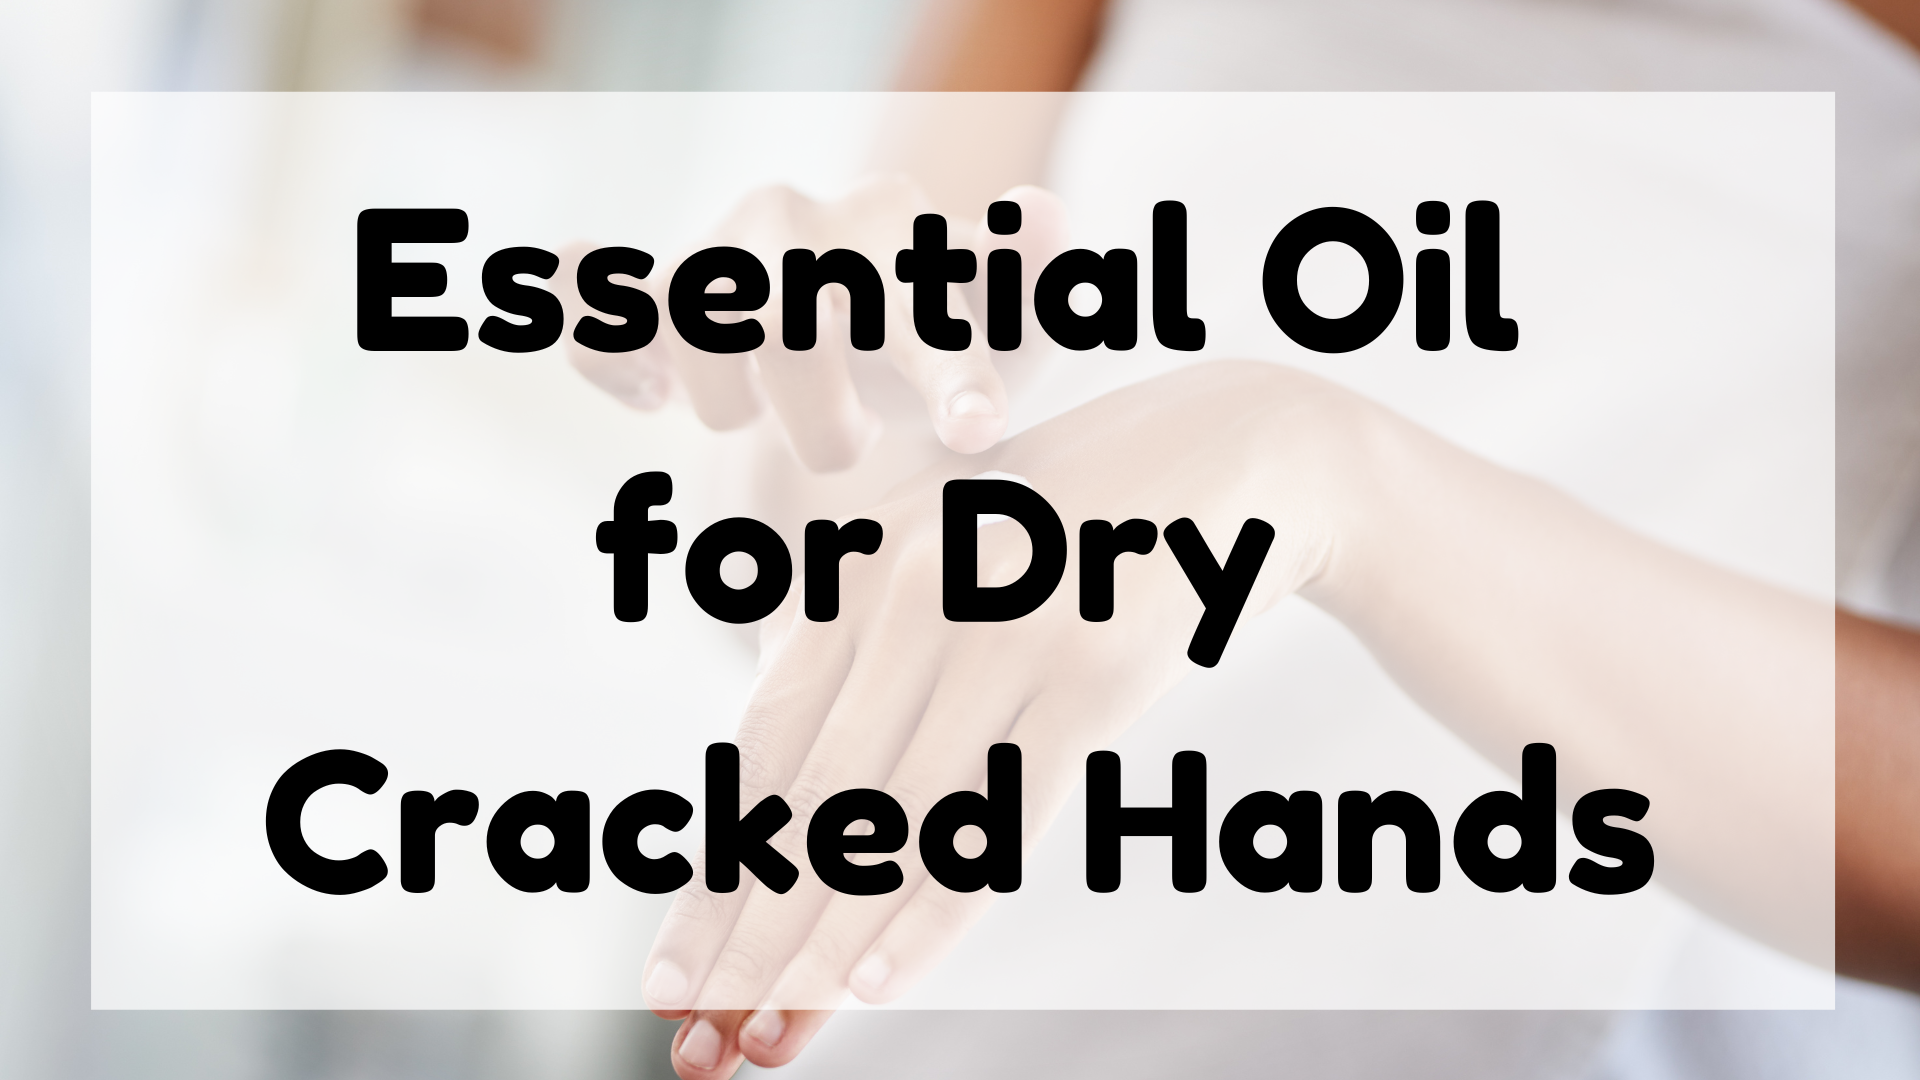 Essential Oil for Dry Cracked Hands featured image